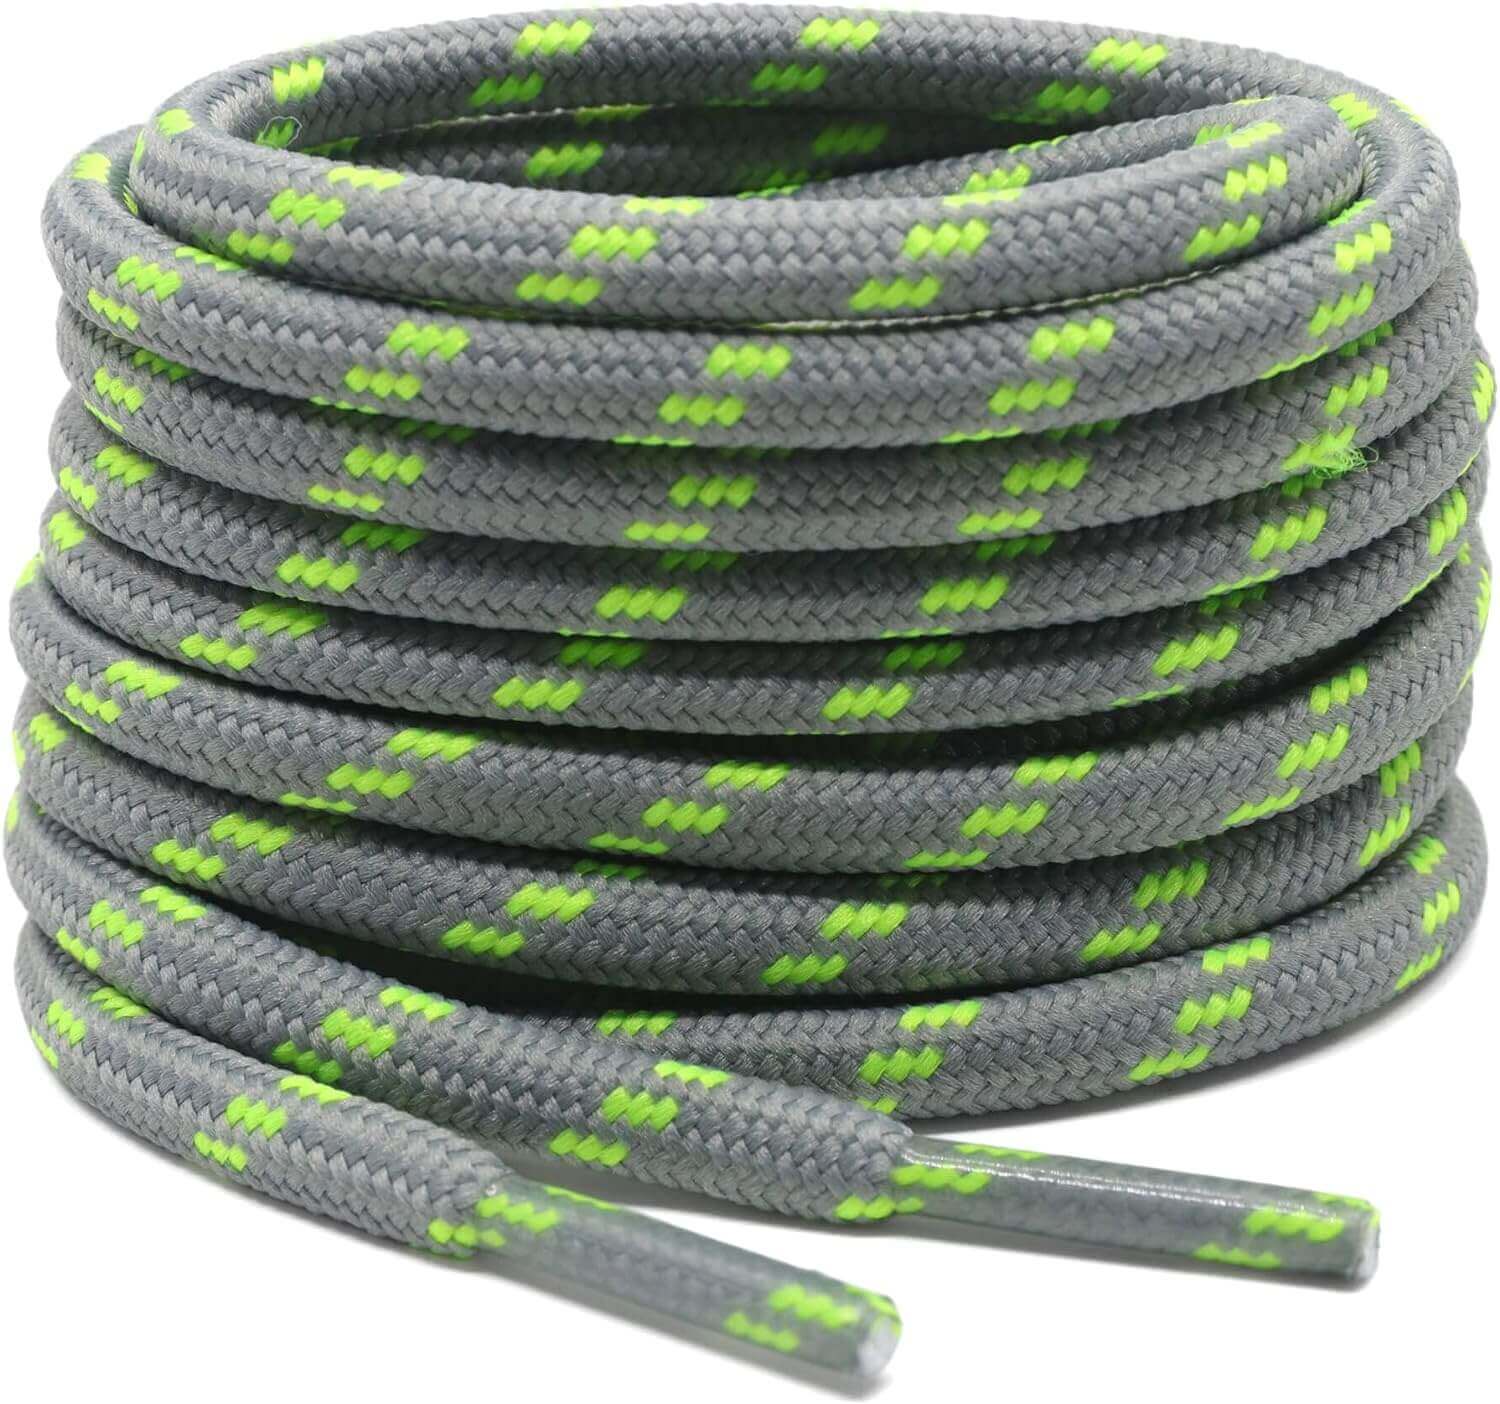 Shop The Latest >2 Pair Work Boot Laces - Hiking, Walking, Shoelaces > *Only $12.54*> From The Top Brand > *DELELEl* > Shop Now and Get Free Shipping On Orders Over $45.00 >*Shop Earth Foot*